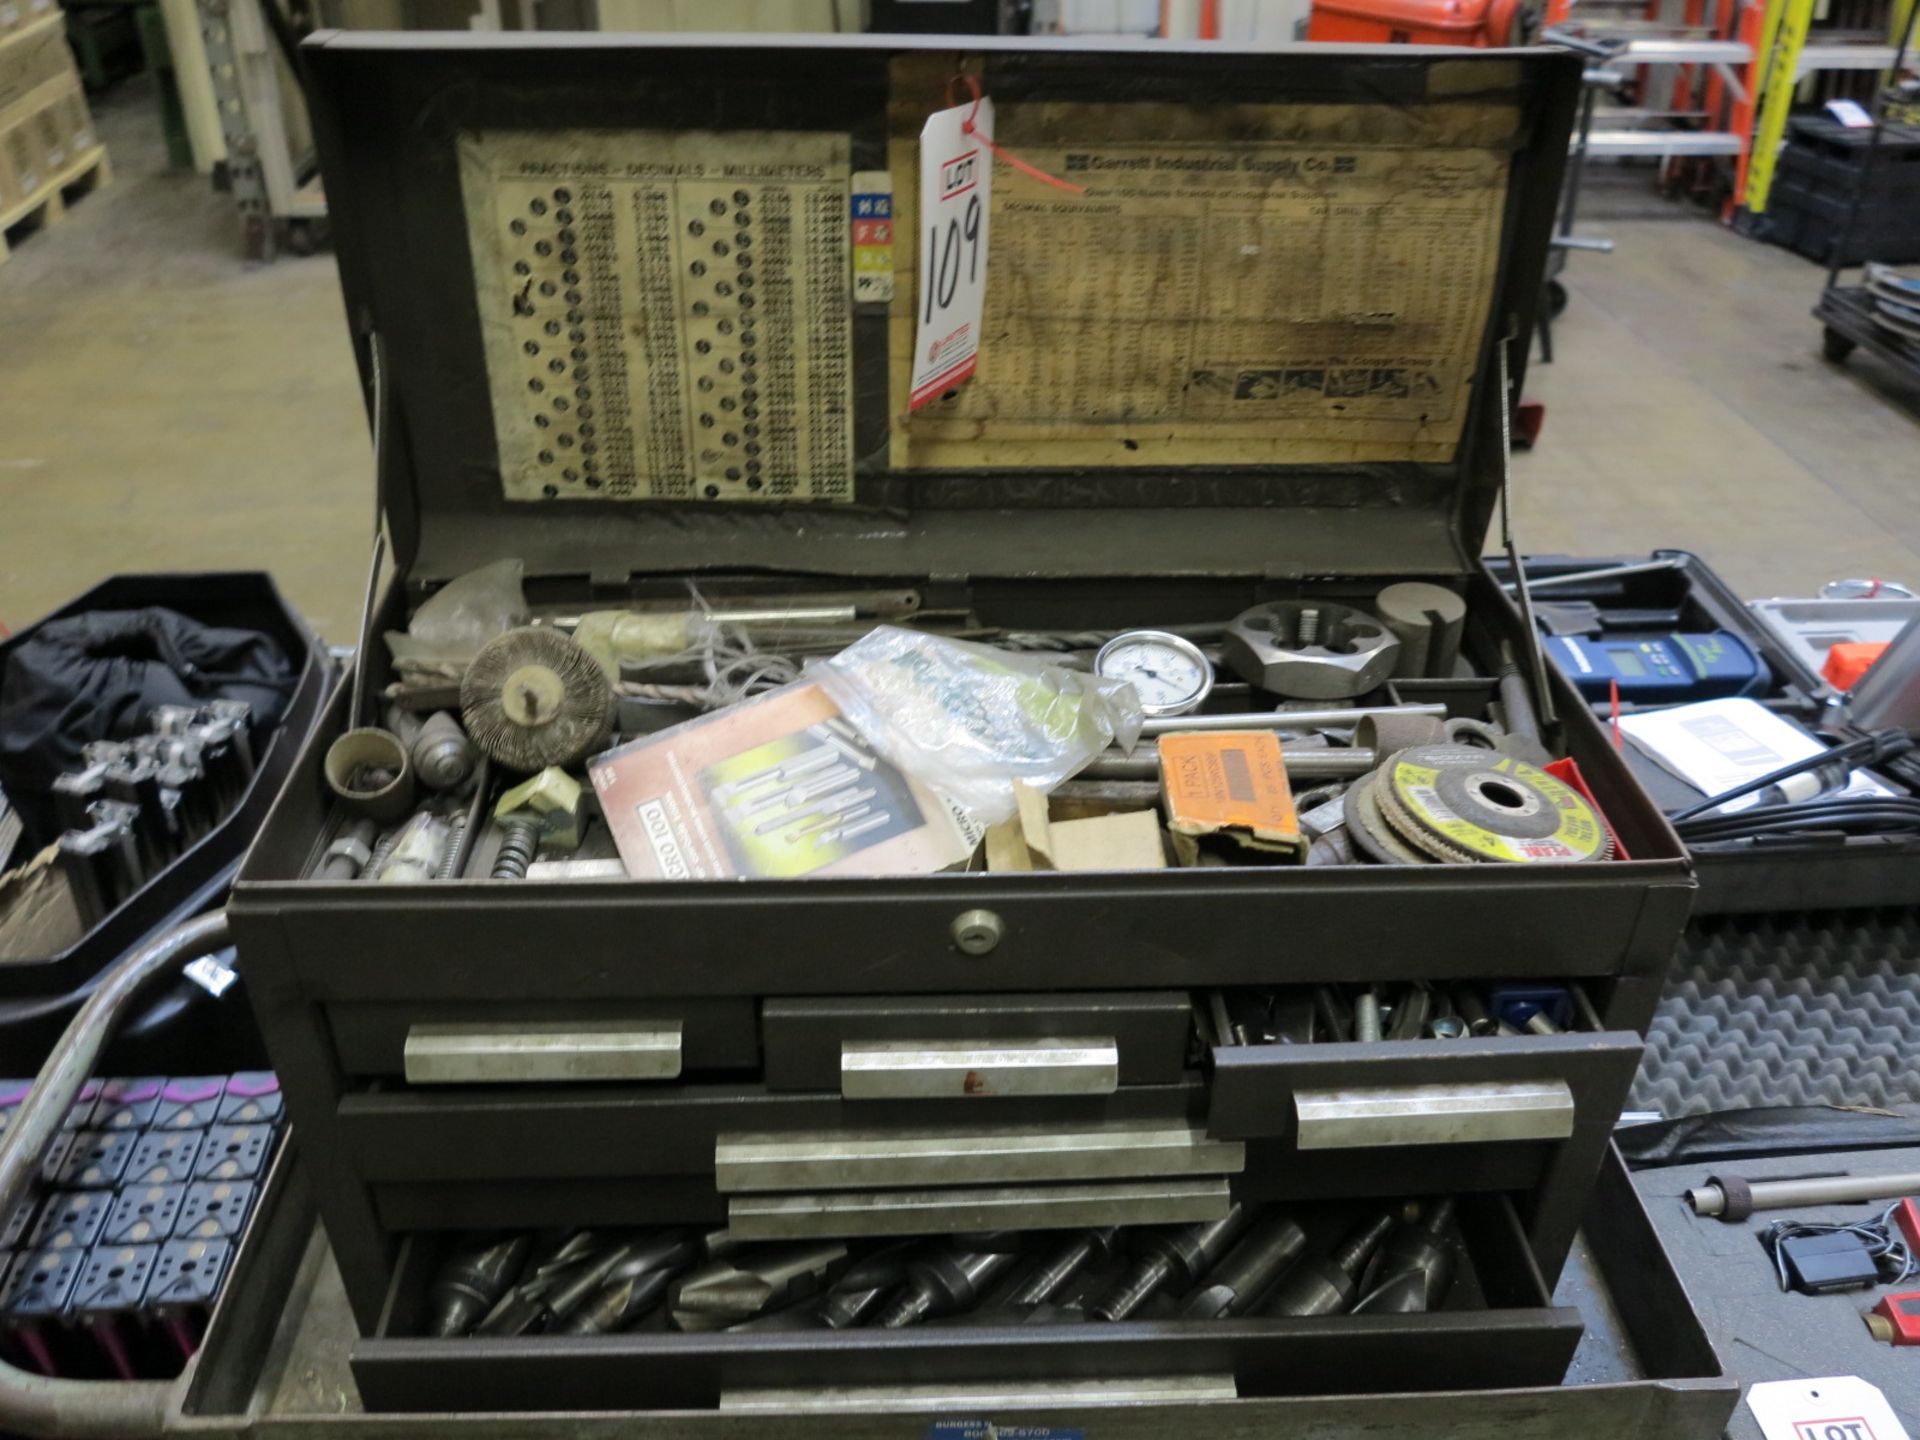 LOT - 6-DRAWER TOOLBOX, W/ CONTENTS: TAPS, DIES, REAMERS, DRILLS, MILL CUTTERS, ETC.